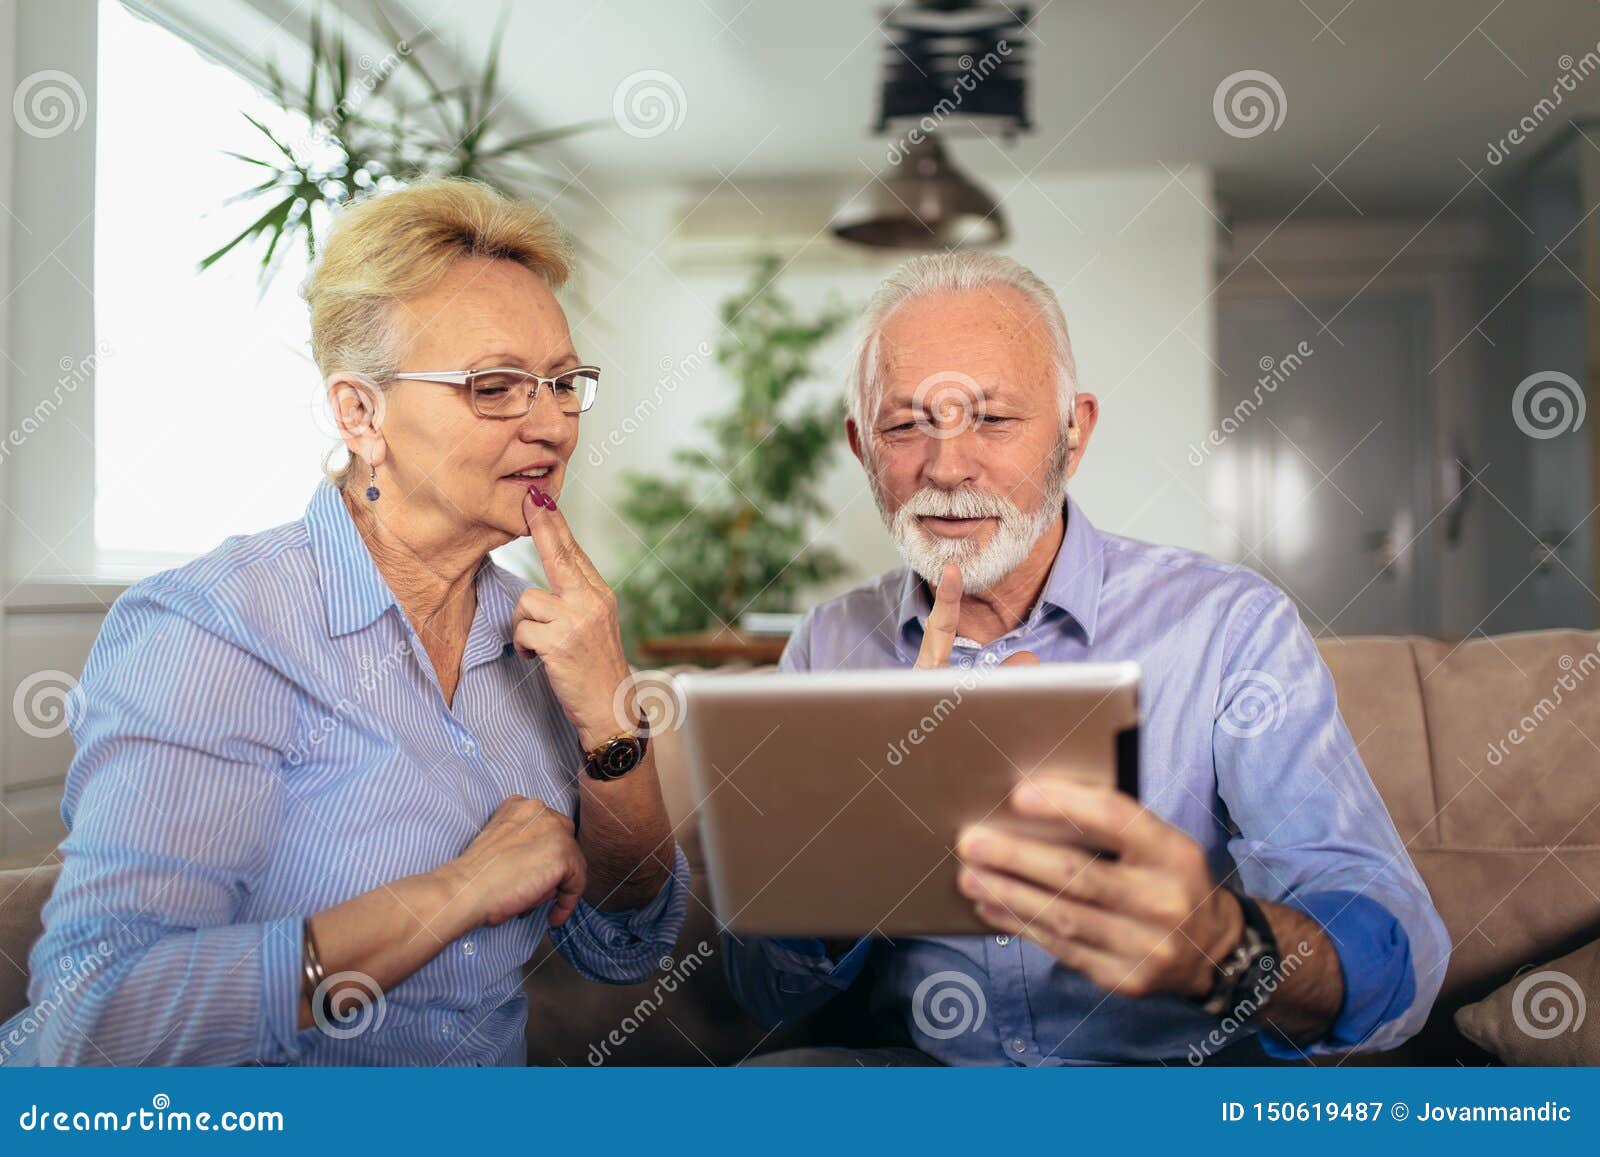 old couple on cam